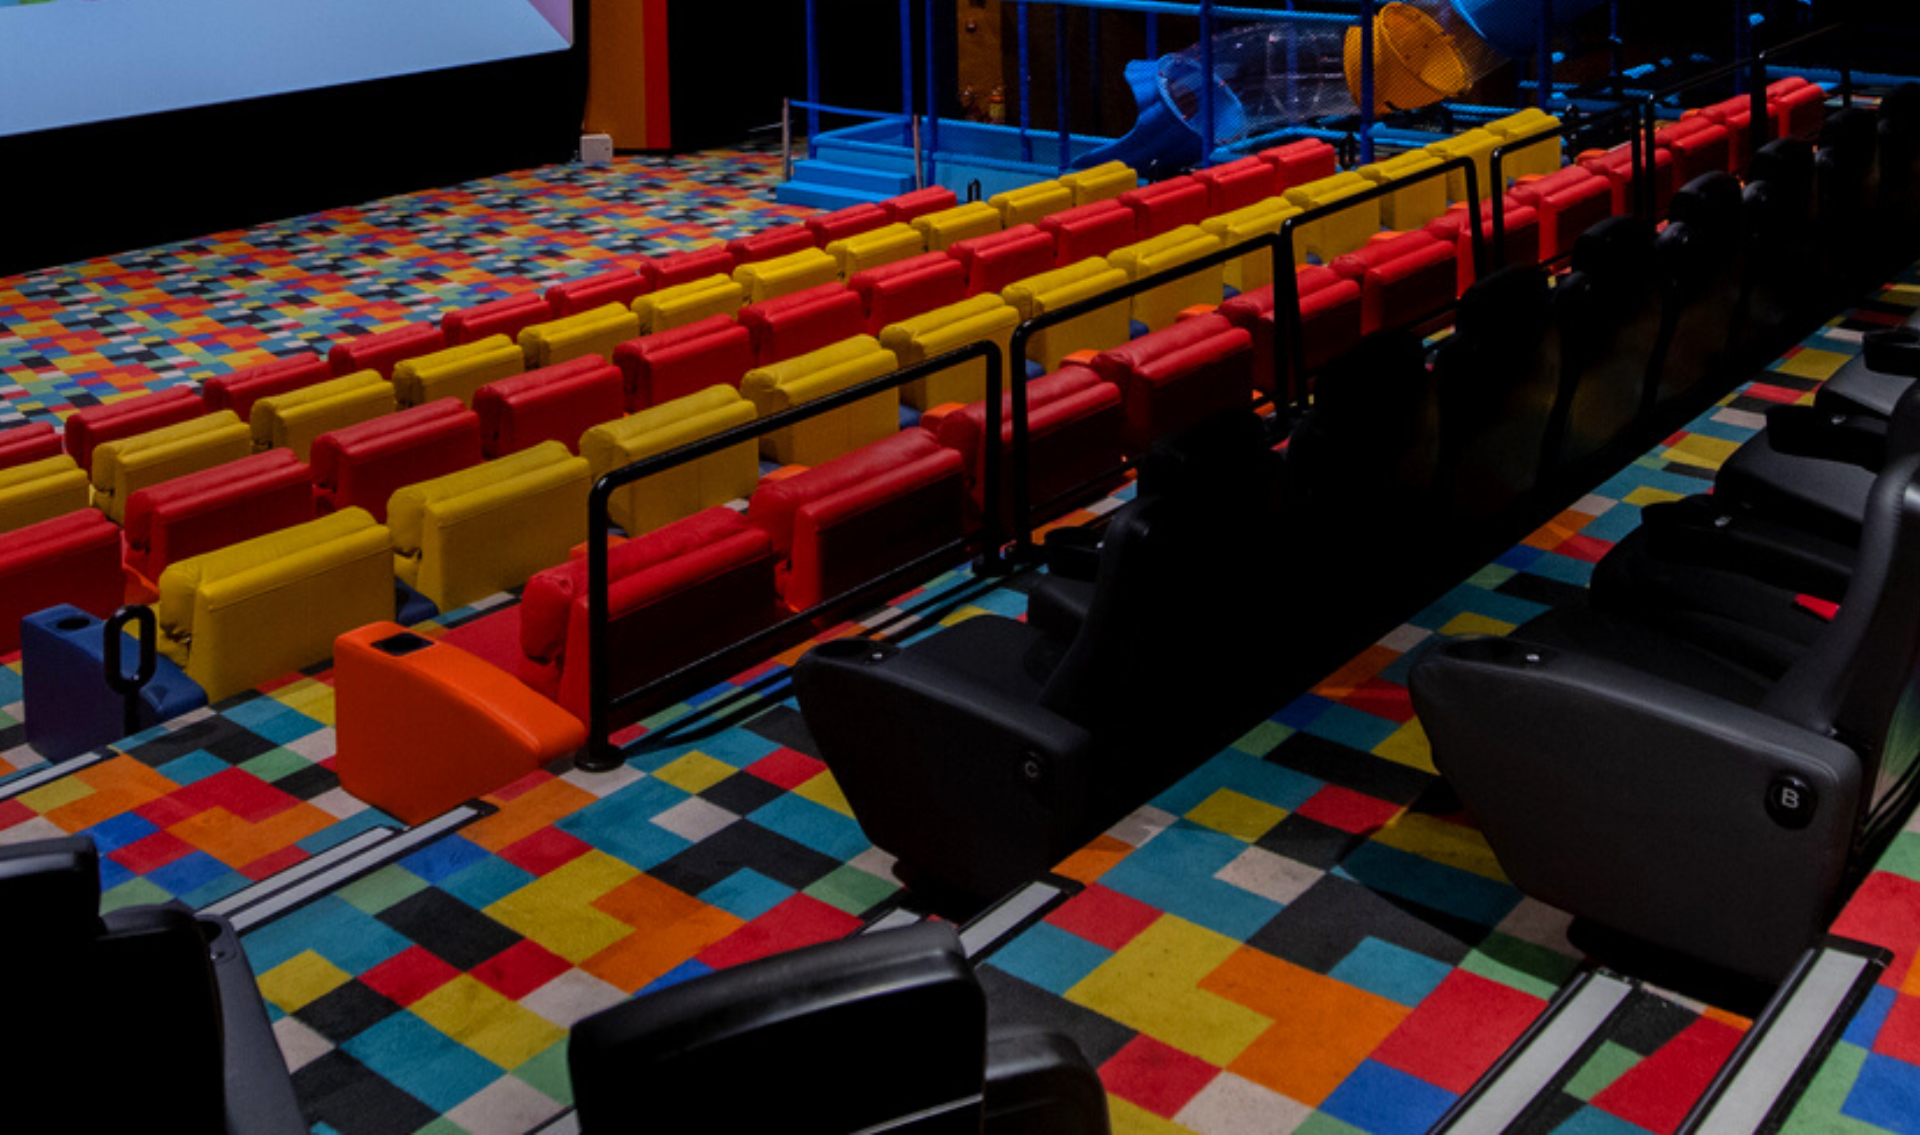 Seats for kids & adults